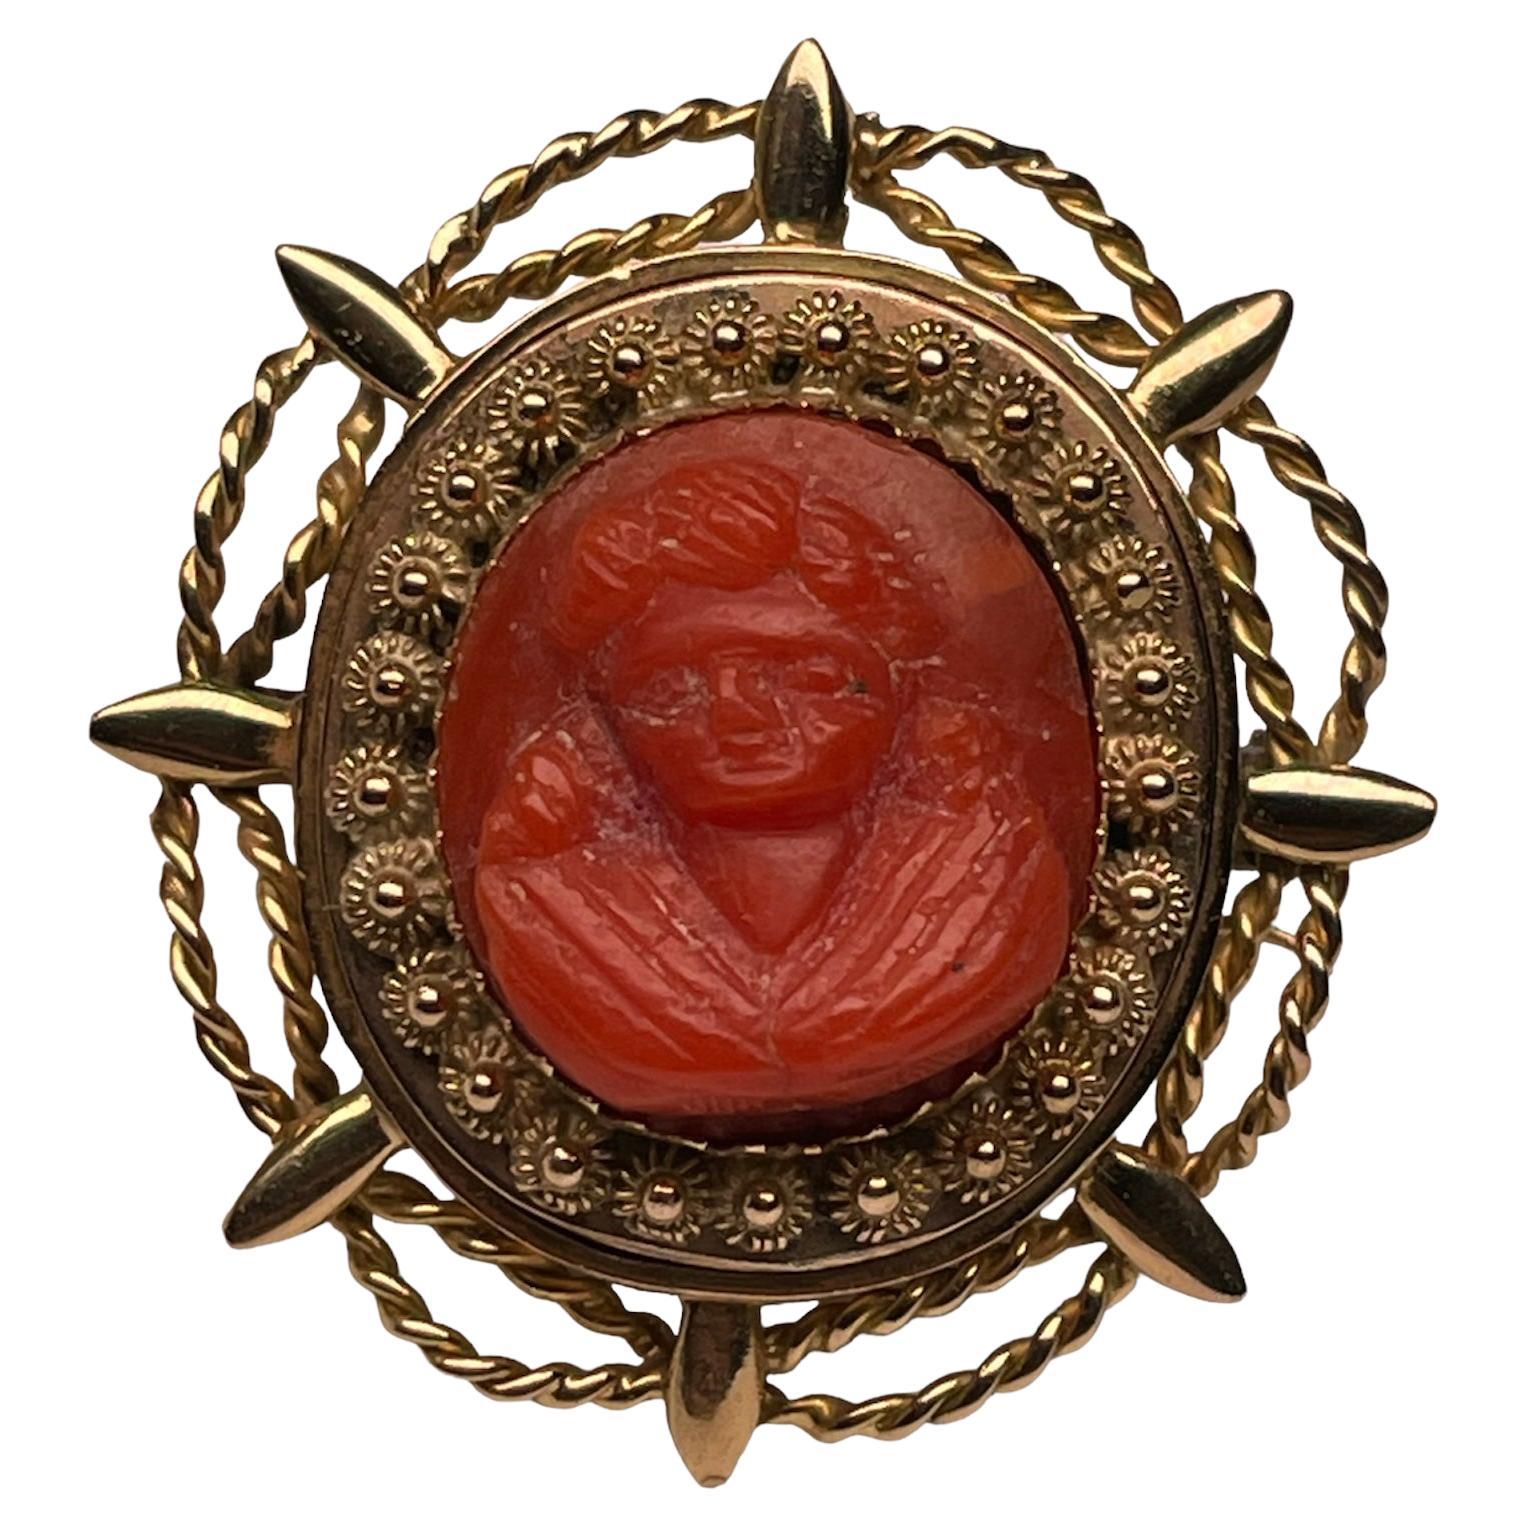 What is a coral cameo?